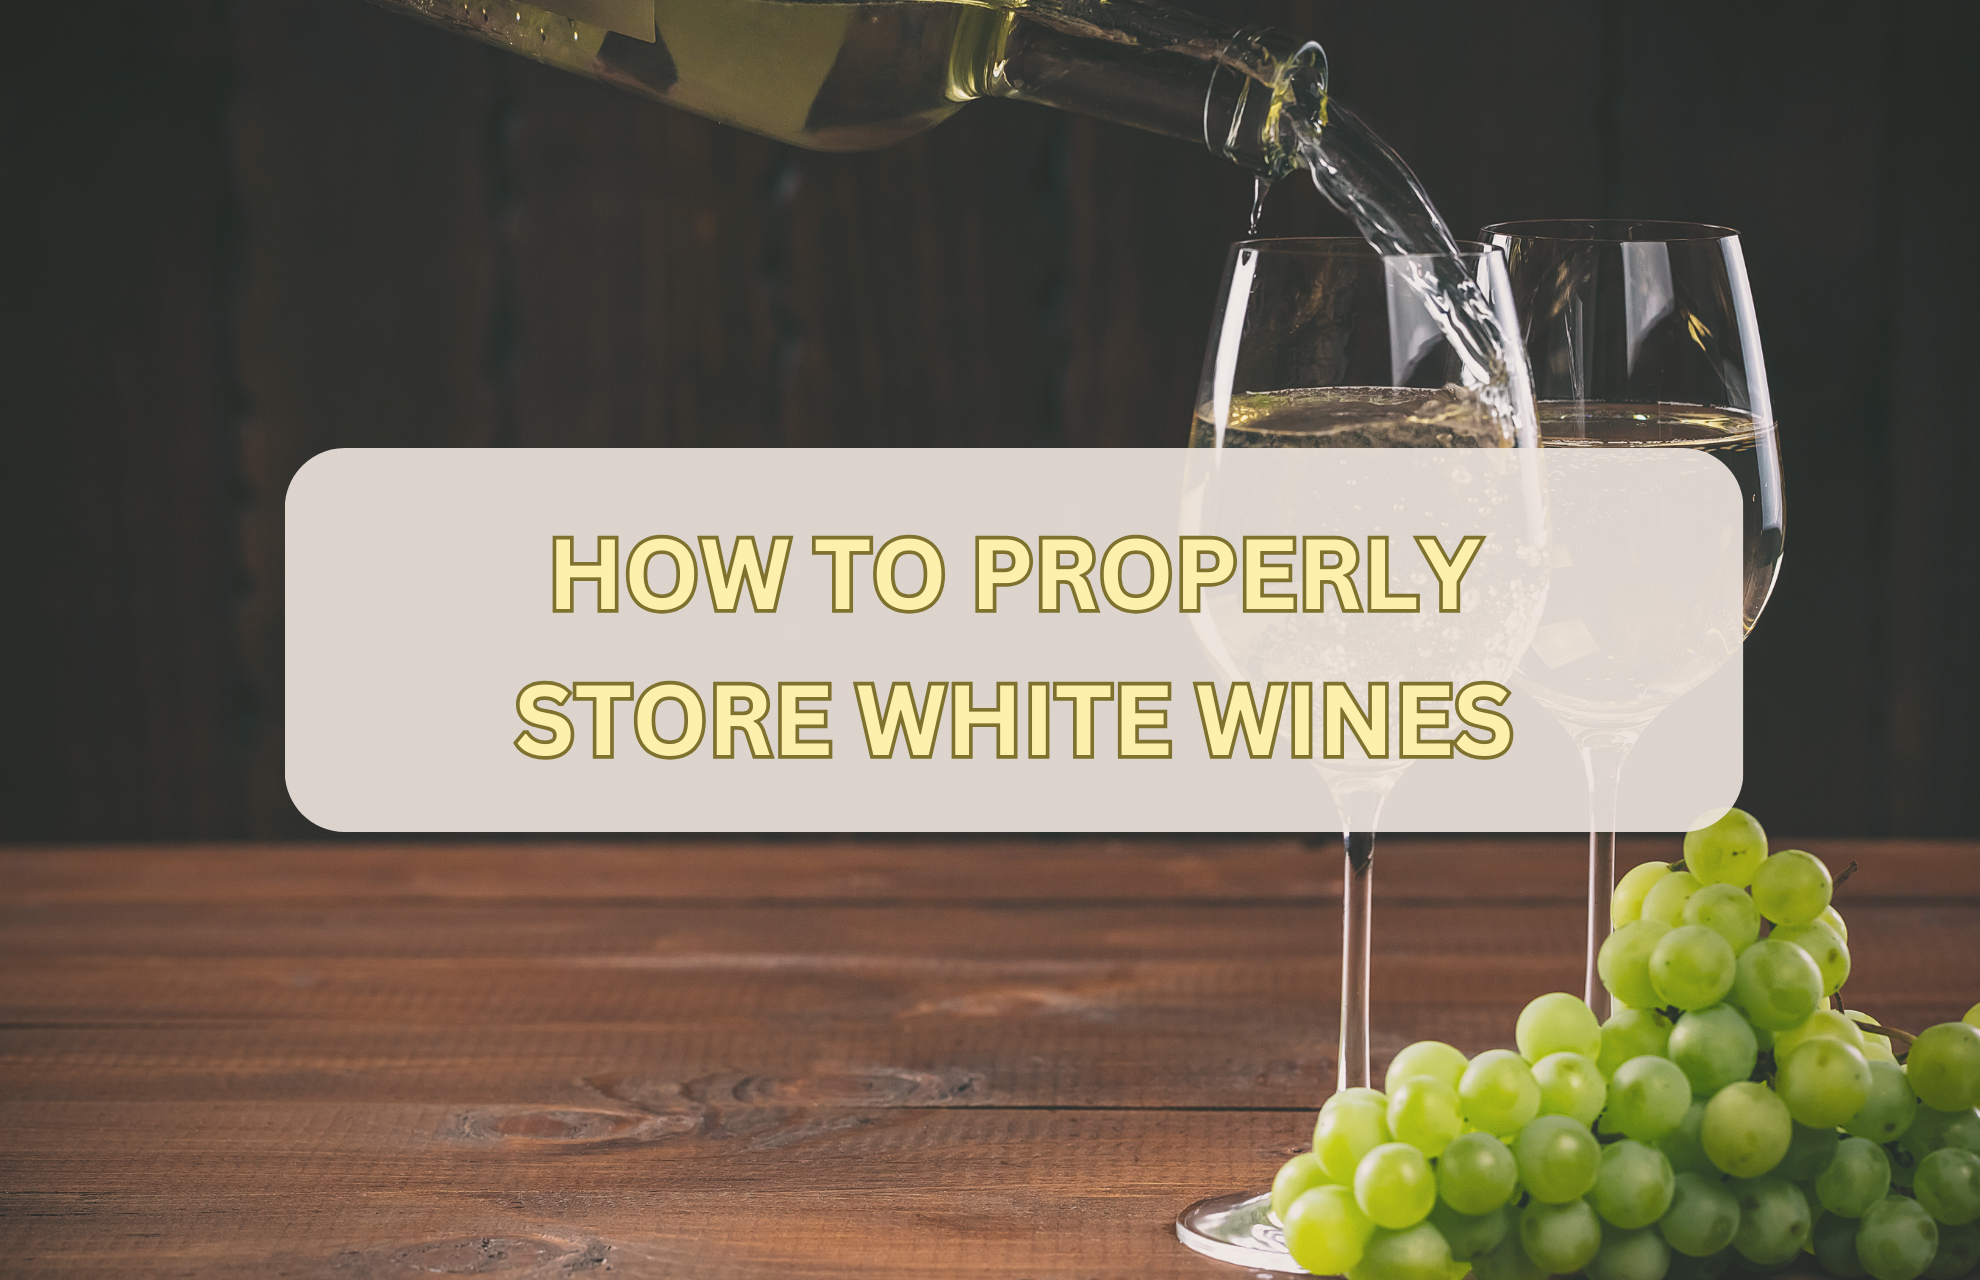 HOW TO PROPERLY STORE WHITE WINES